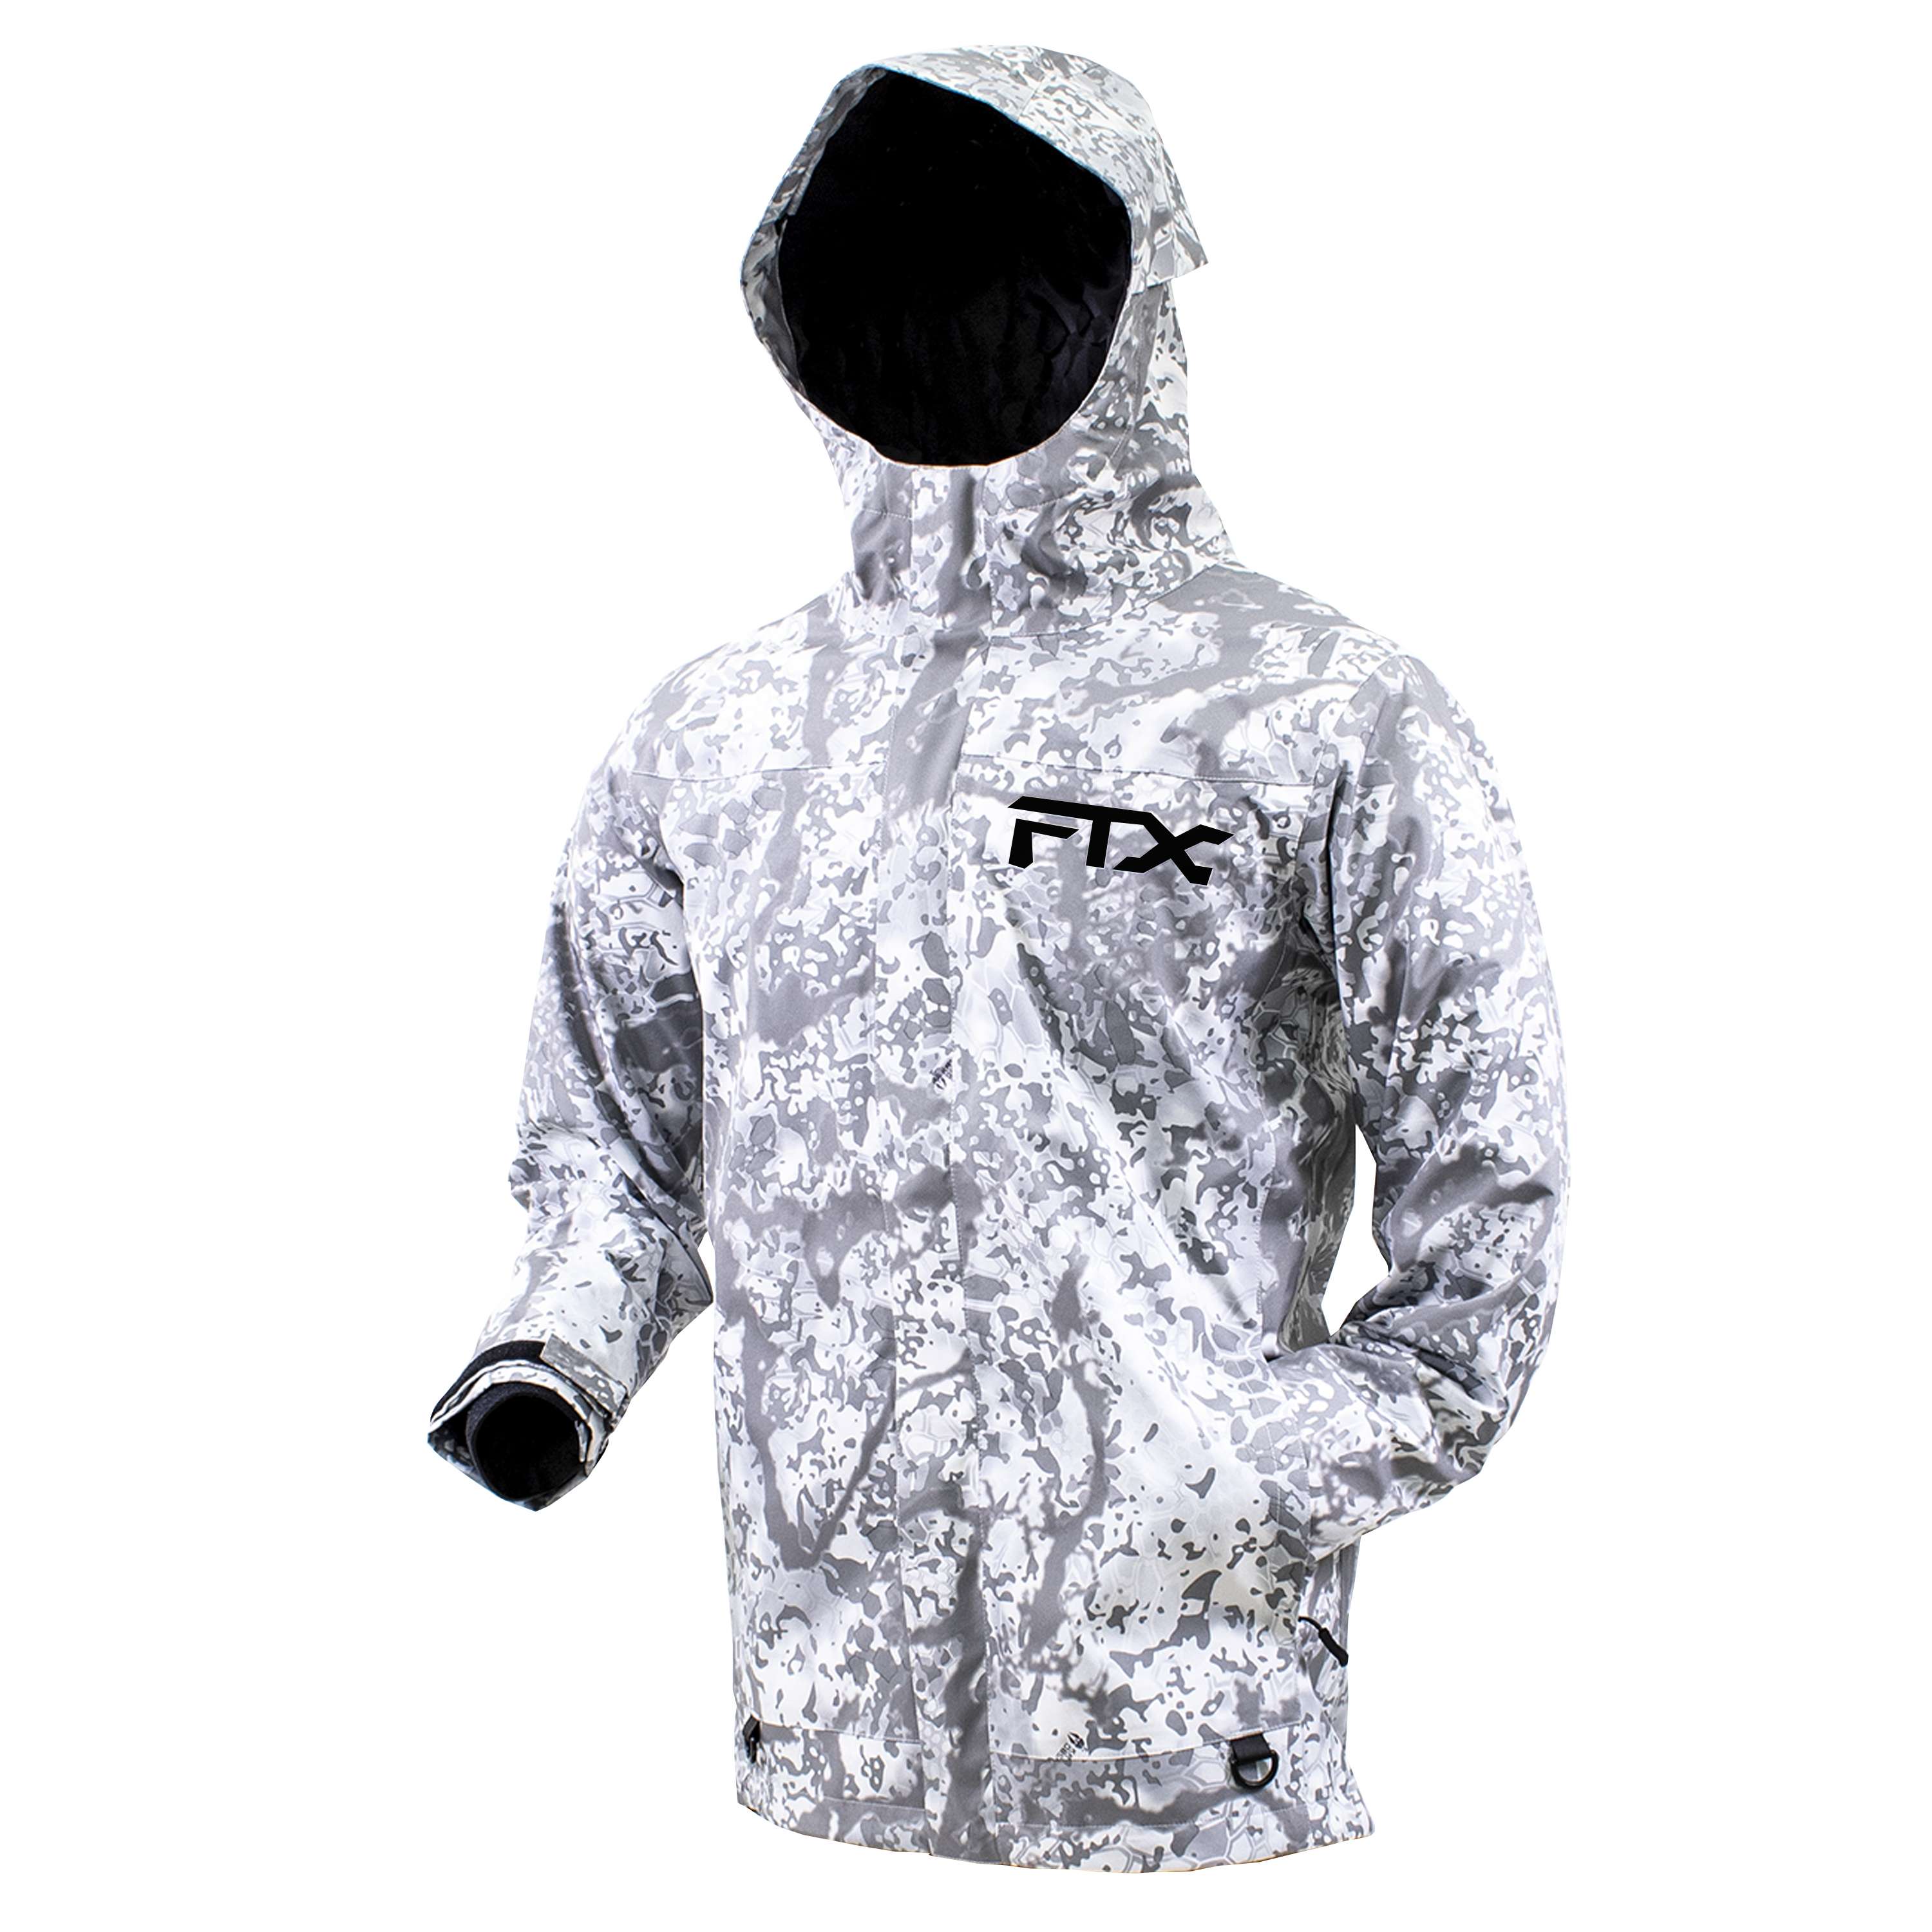 Frogg Toggs® FTX Armor Jacket